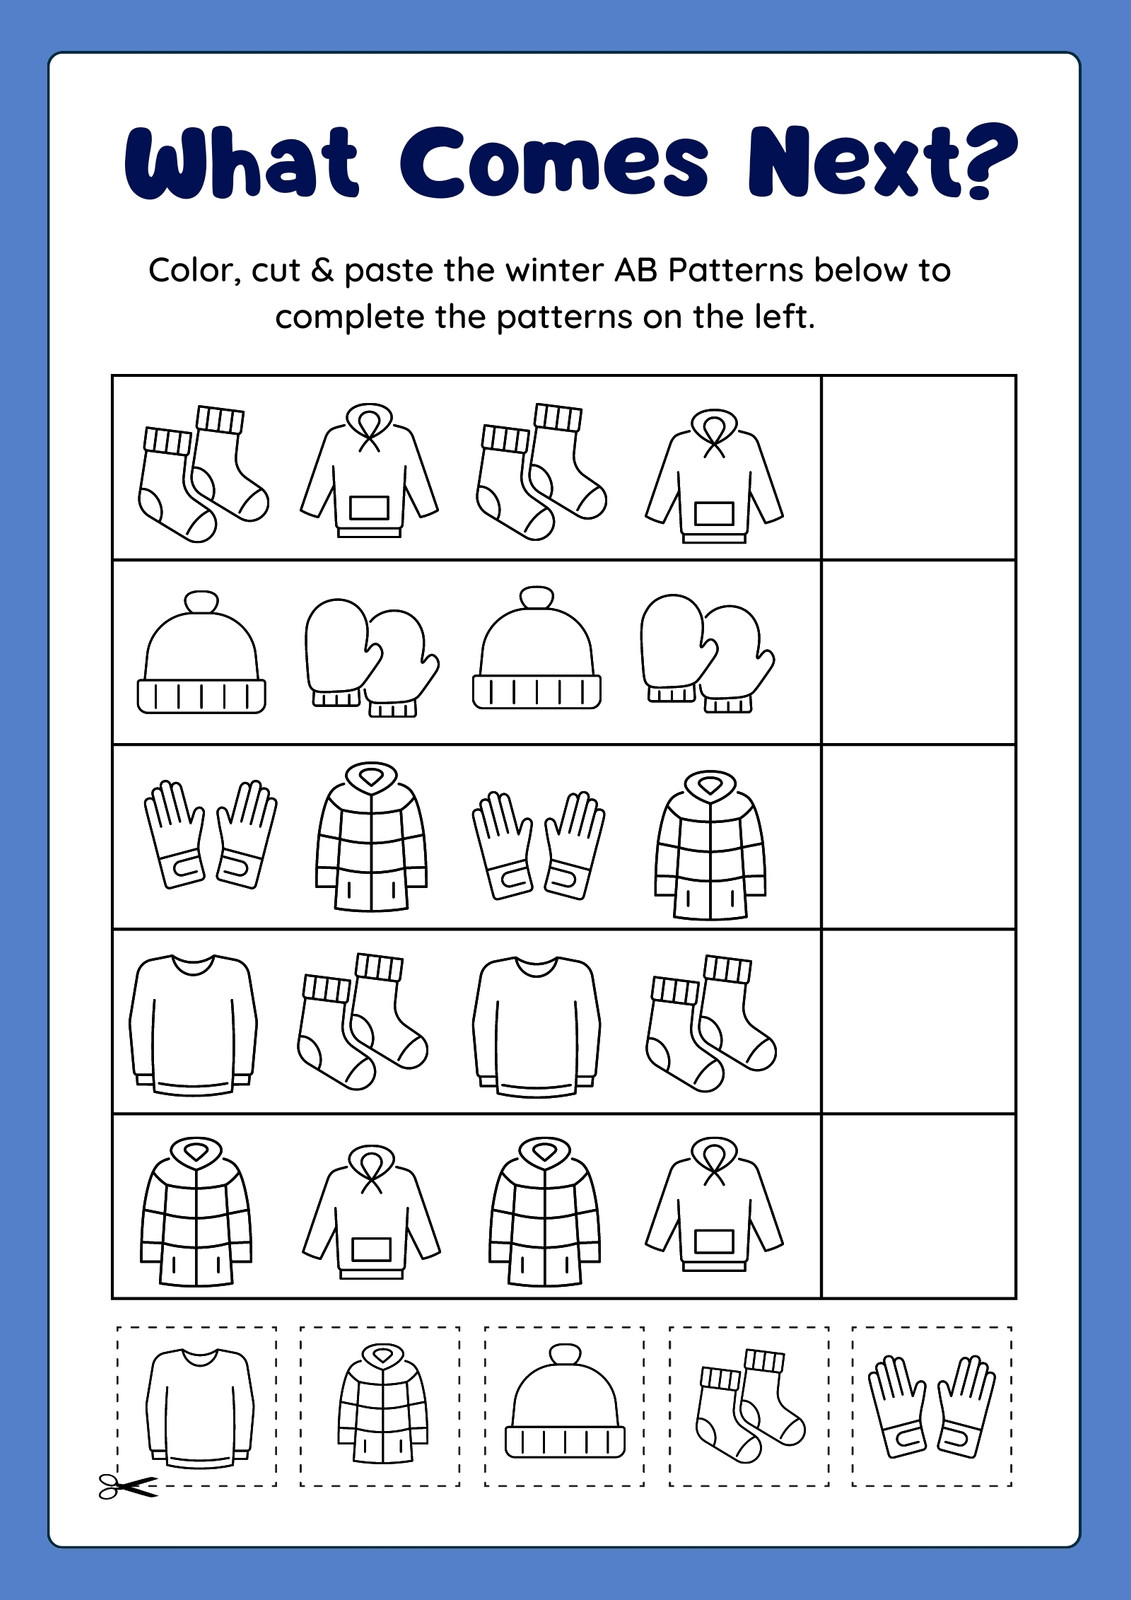 Winter Clothes & Accessories Vocabulary Worksheet - Templates by Canva